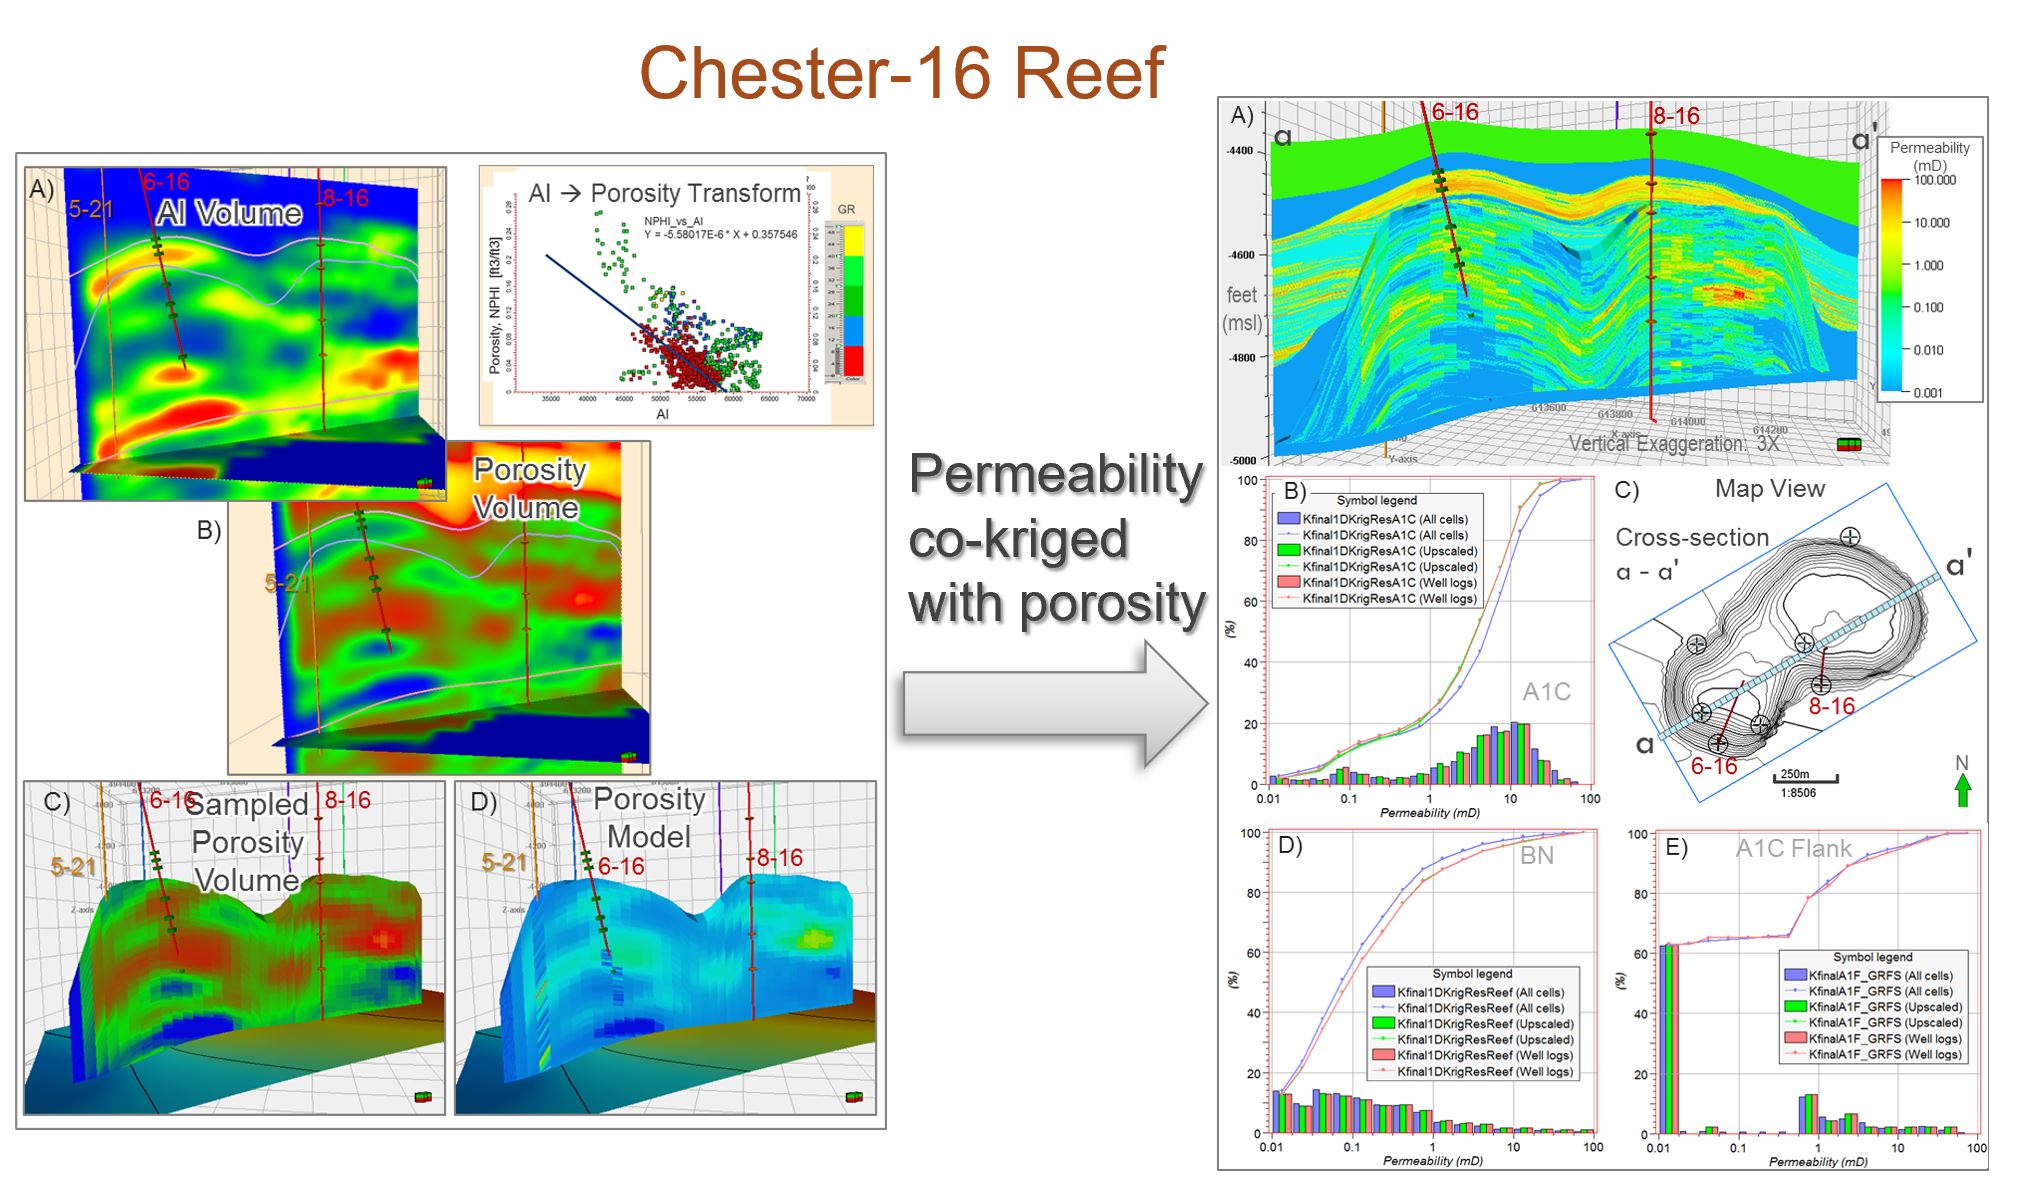 Example of a detailed reef model showing developing of porosity distribution from various data sets, and porosity to permeability transforms to be used for dynamic simulations.